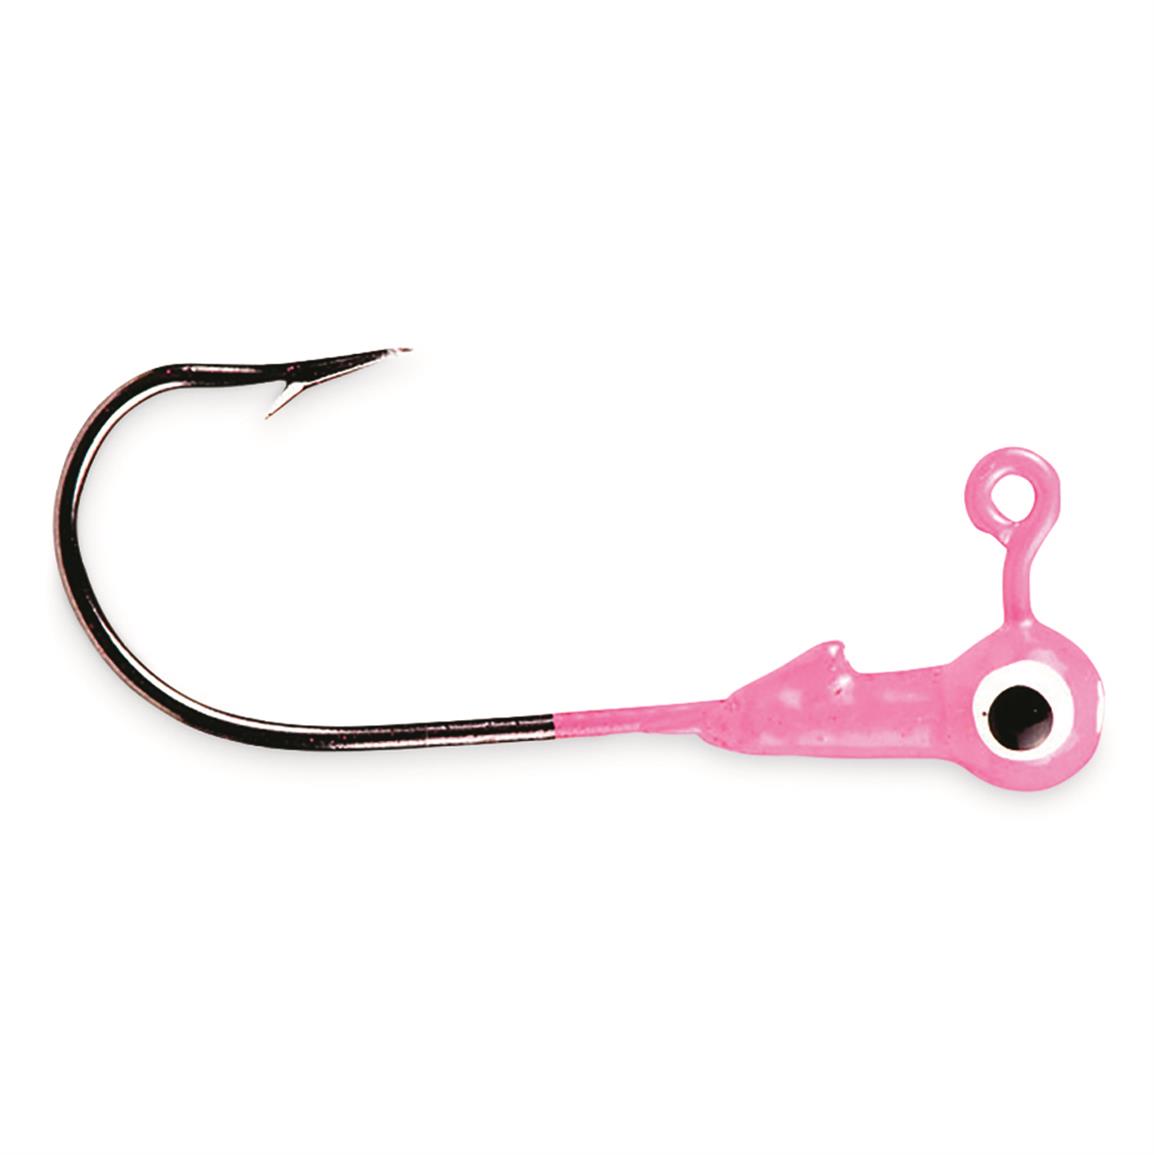 Mr. Crappie Jig Heads, 8 Pack, Pink